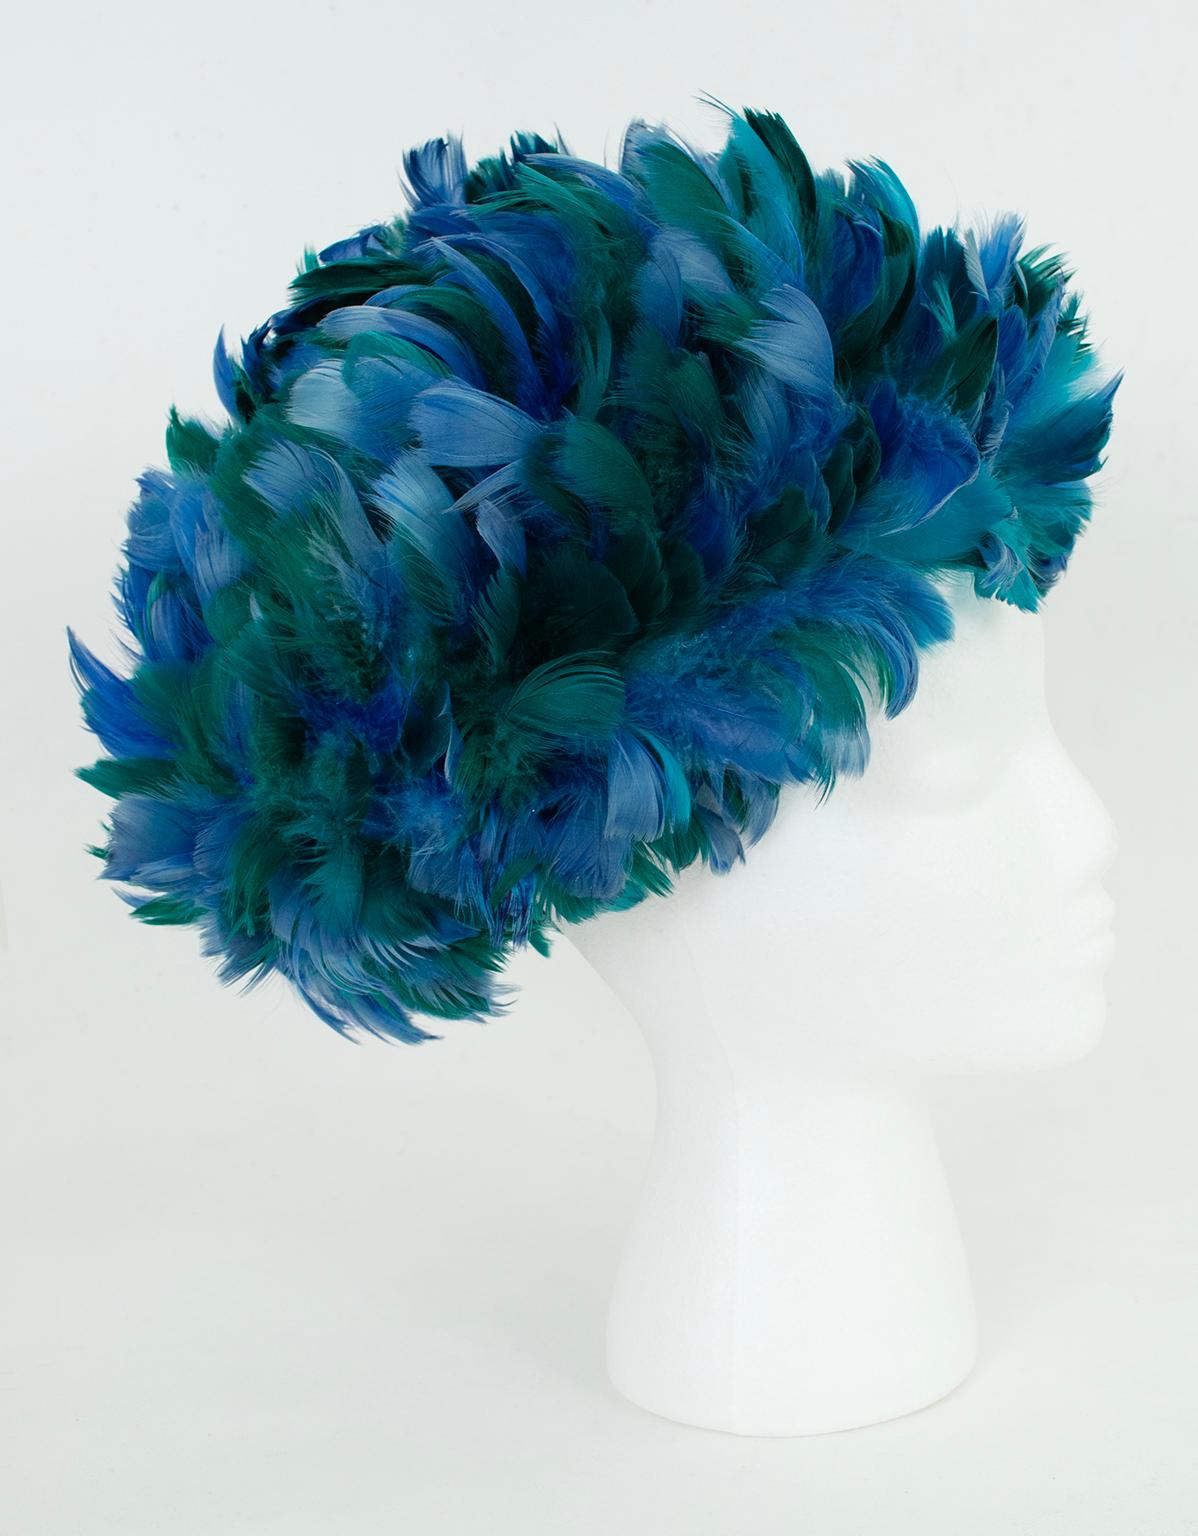 When flamboyance is required, look no further than an Afro turban of emerald and cobalt feathers.  Constructed like an elastic shower cap, when stuffed it can reach a height of nearly a foot.  A Vegas showgirl-worthy headpiece.

Elastic